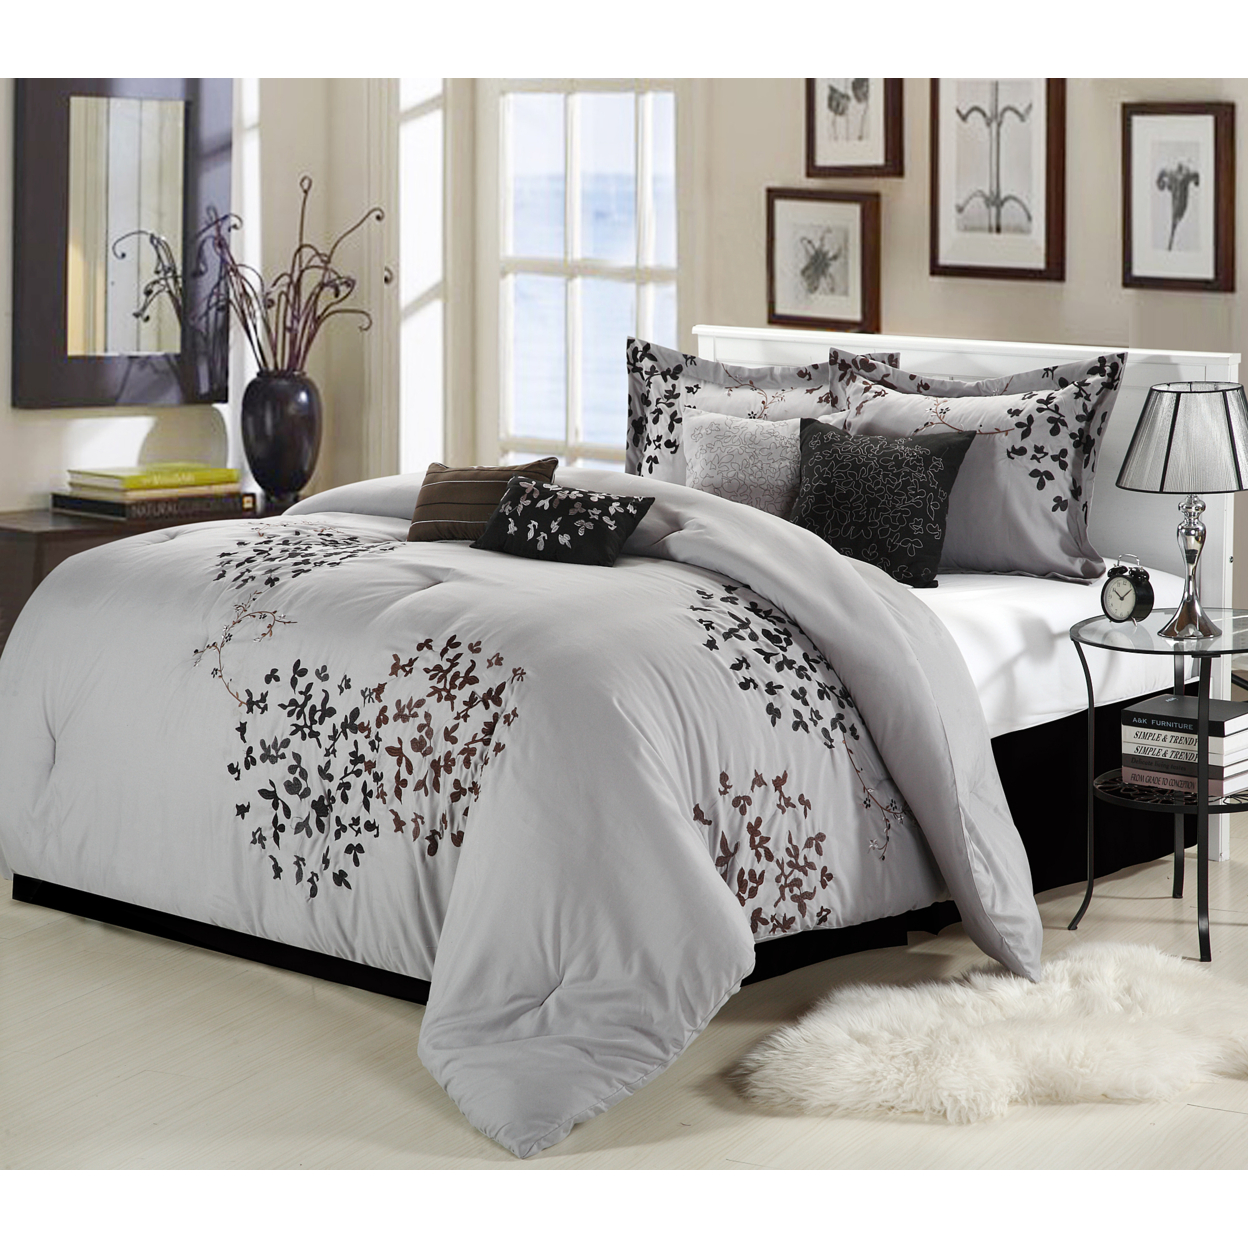 Cheila 8-Piece Embroidered Comforter Set - Silver, King